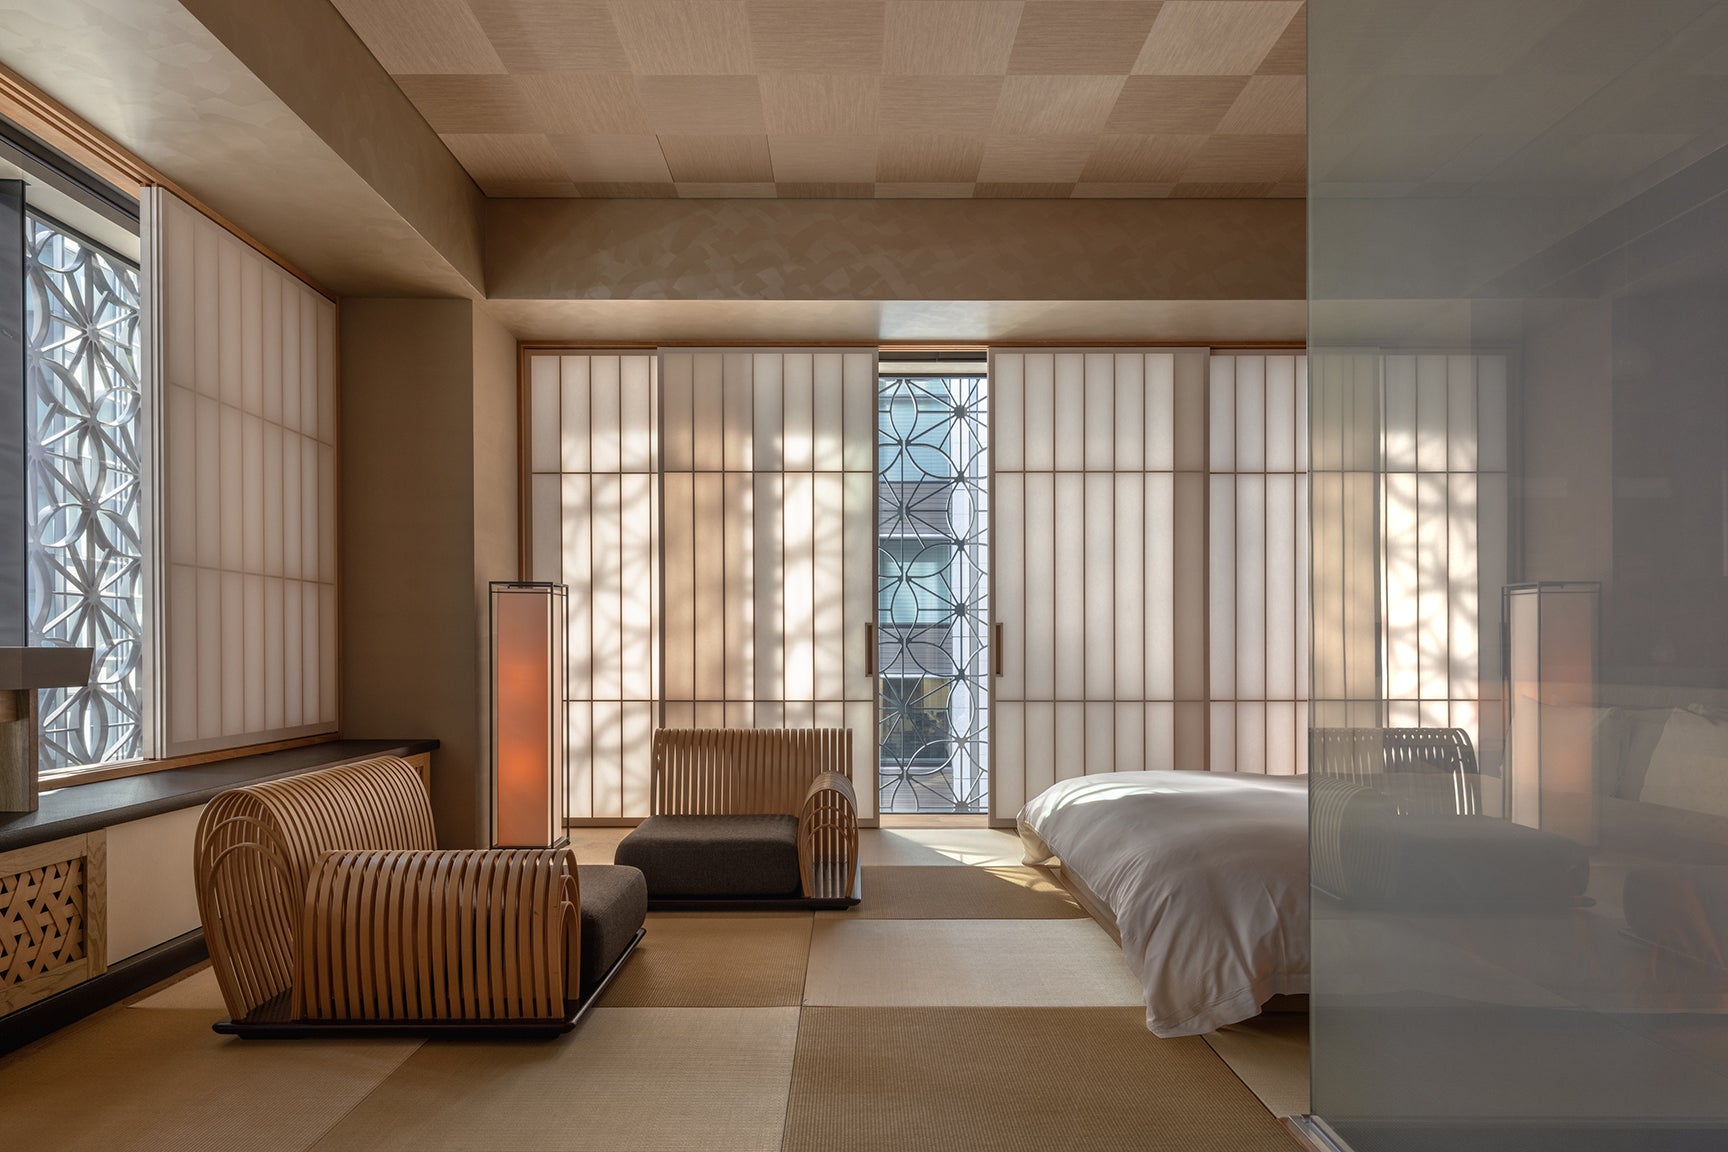 From a Muji-Furnished Haven to an Urban Ryokan, These Are the Best Hotels in Tokyo